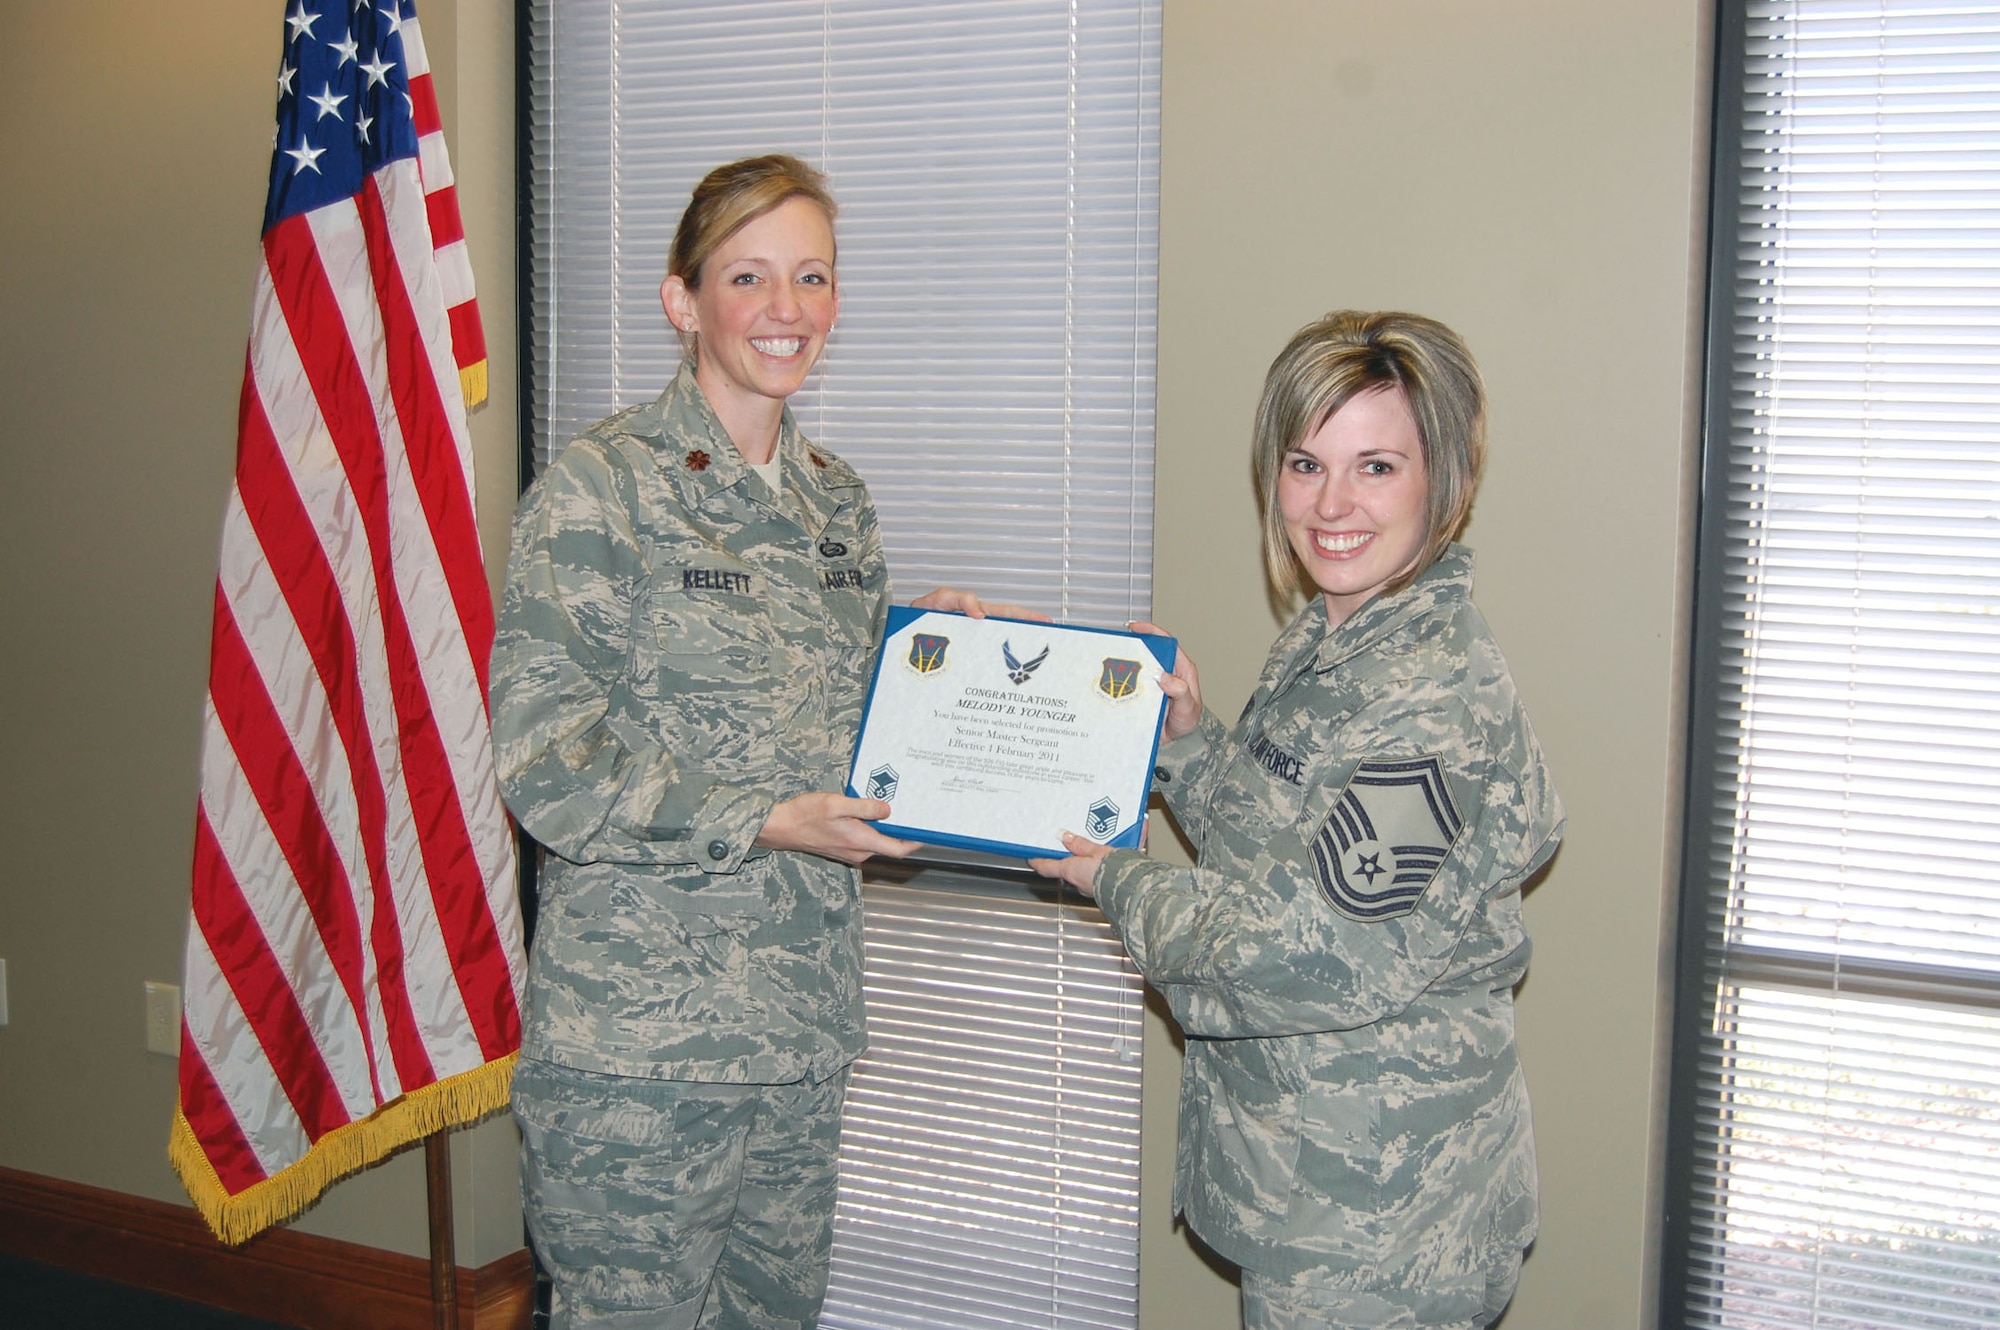 NELLIS AIR FORCE BASE, Nev. -- (Right) Senior Master Sgt. Melody Younger receives a certificate from Maj. Alexis Kellett, 926th Force Support Squadron commander, during her promotion ceremony here Feb. 1. Sergeant Younger is the manpower and personnel flight superintendent for the 926th FSS. (U.S. Air Force photo/Master Sgt. MaryAnn Martin)